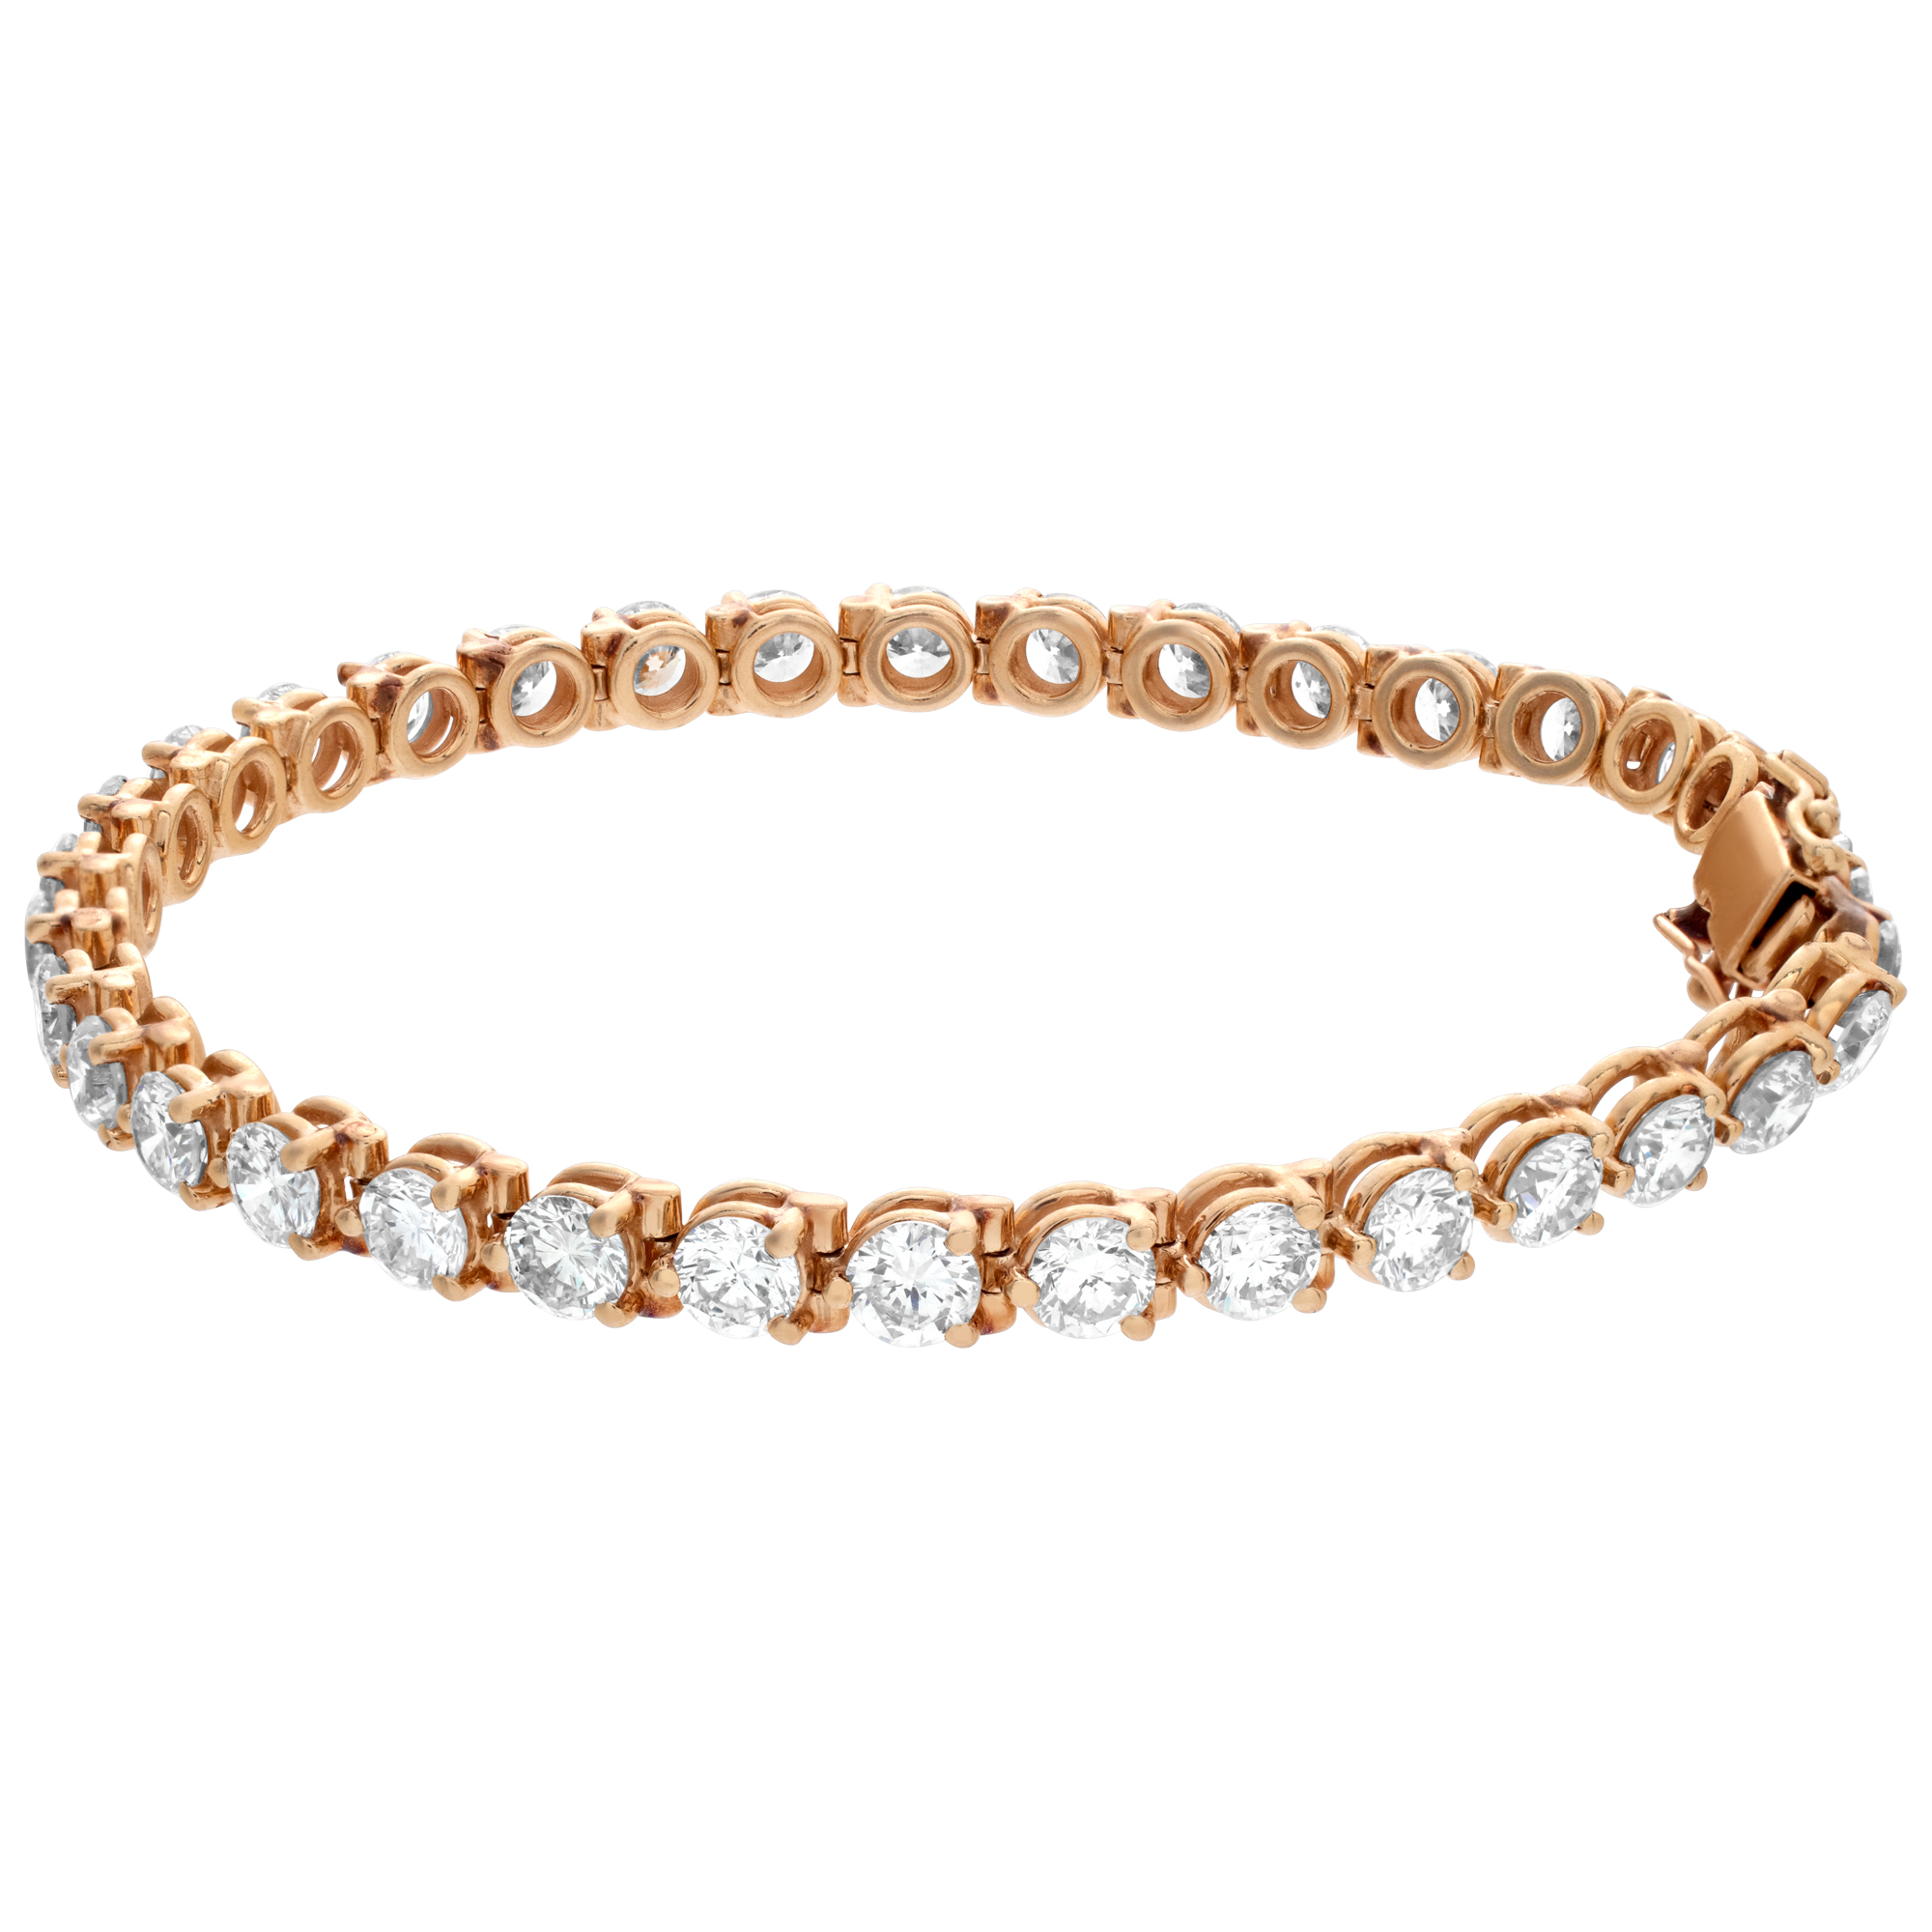 Diamond line bracelet in 14k yellow gold with approximately 10 carats in diamonds I-J Color, SI-I Clarity. image 1